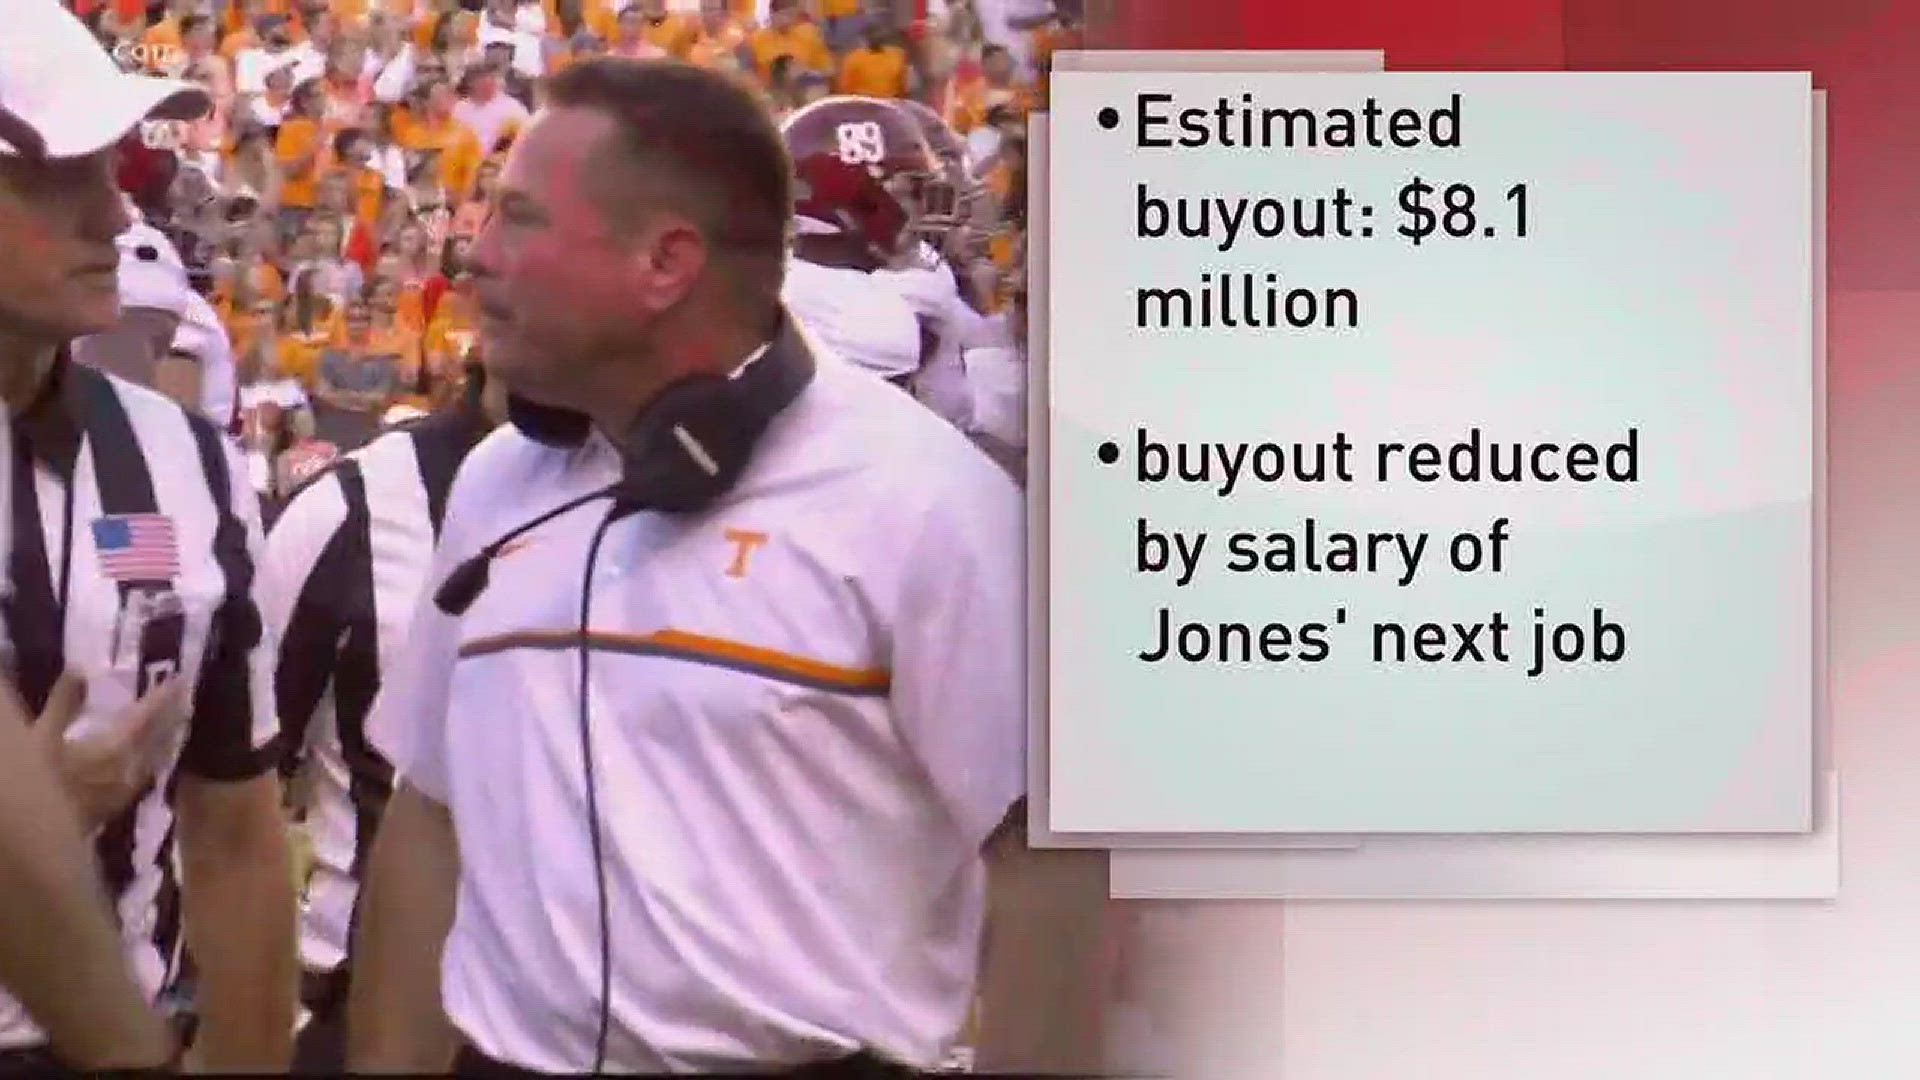 Butch Jones still has a contract that runs through 2021 and will be paid $2.5 million per year until that time.